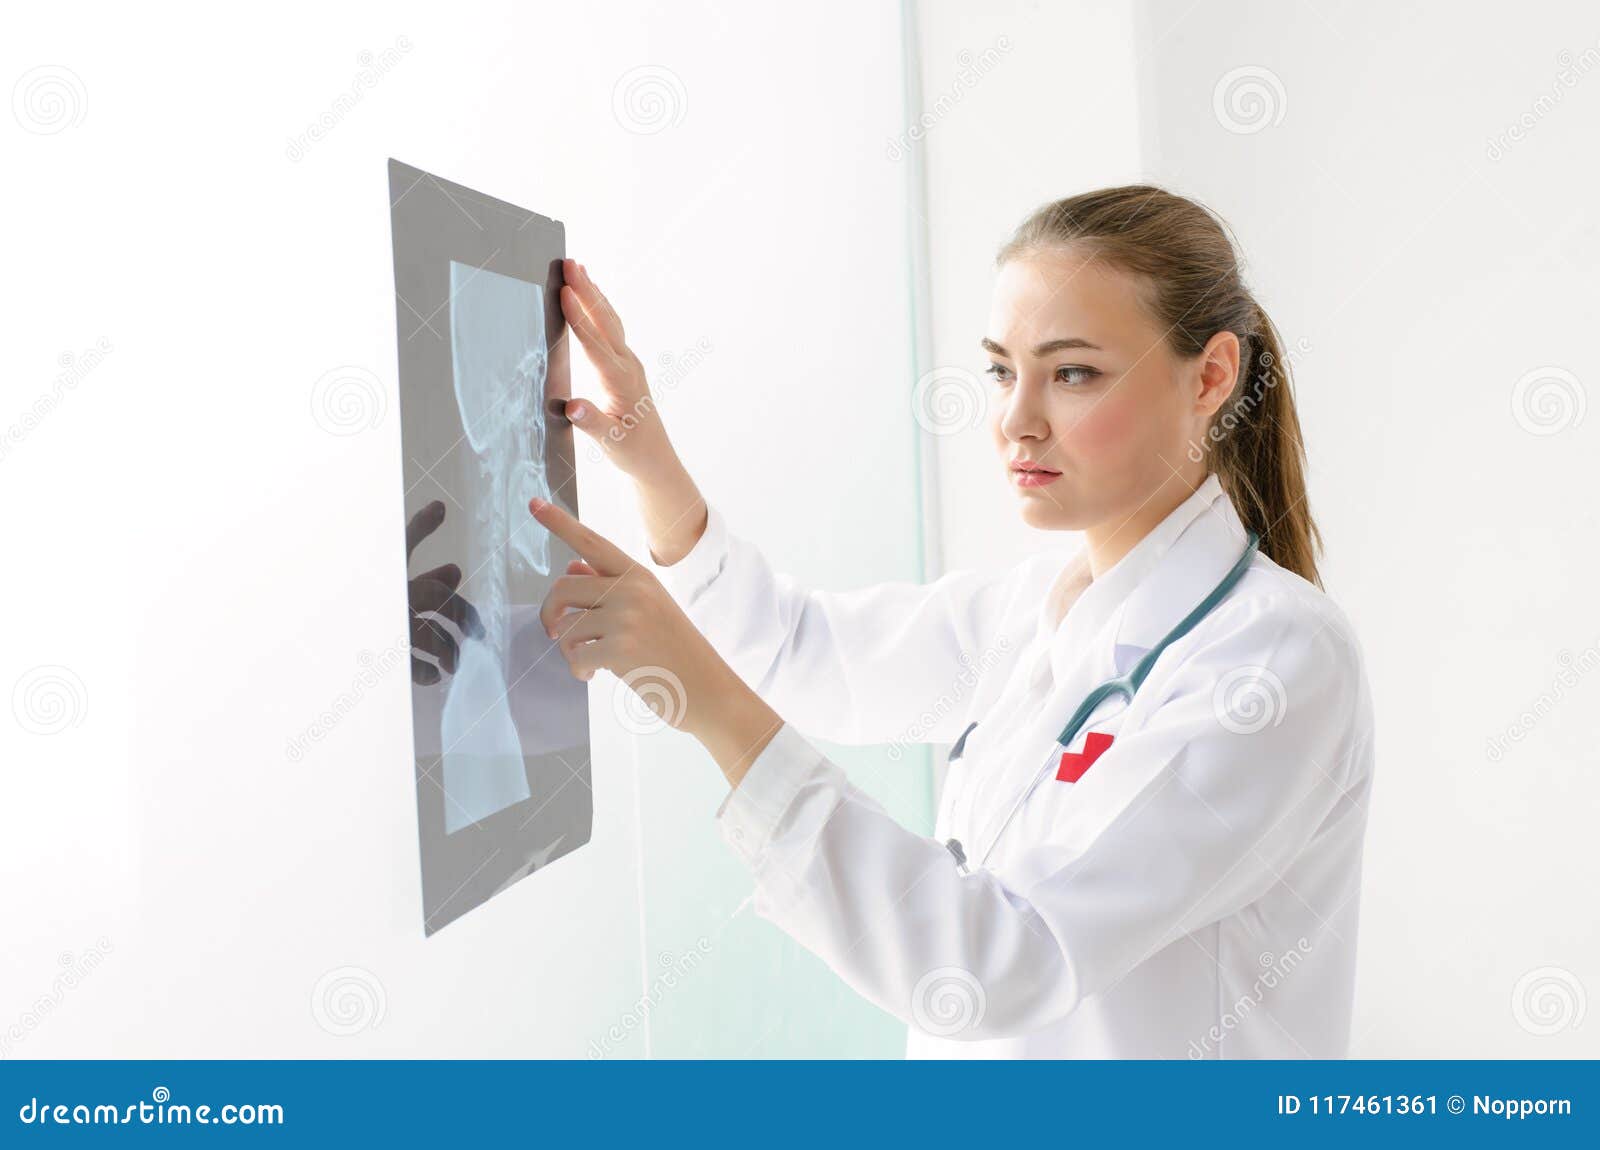 female doctor explained the results of the x-ray examination.